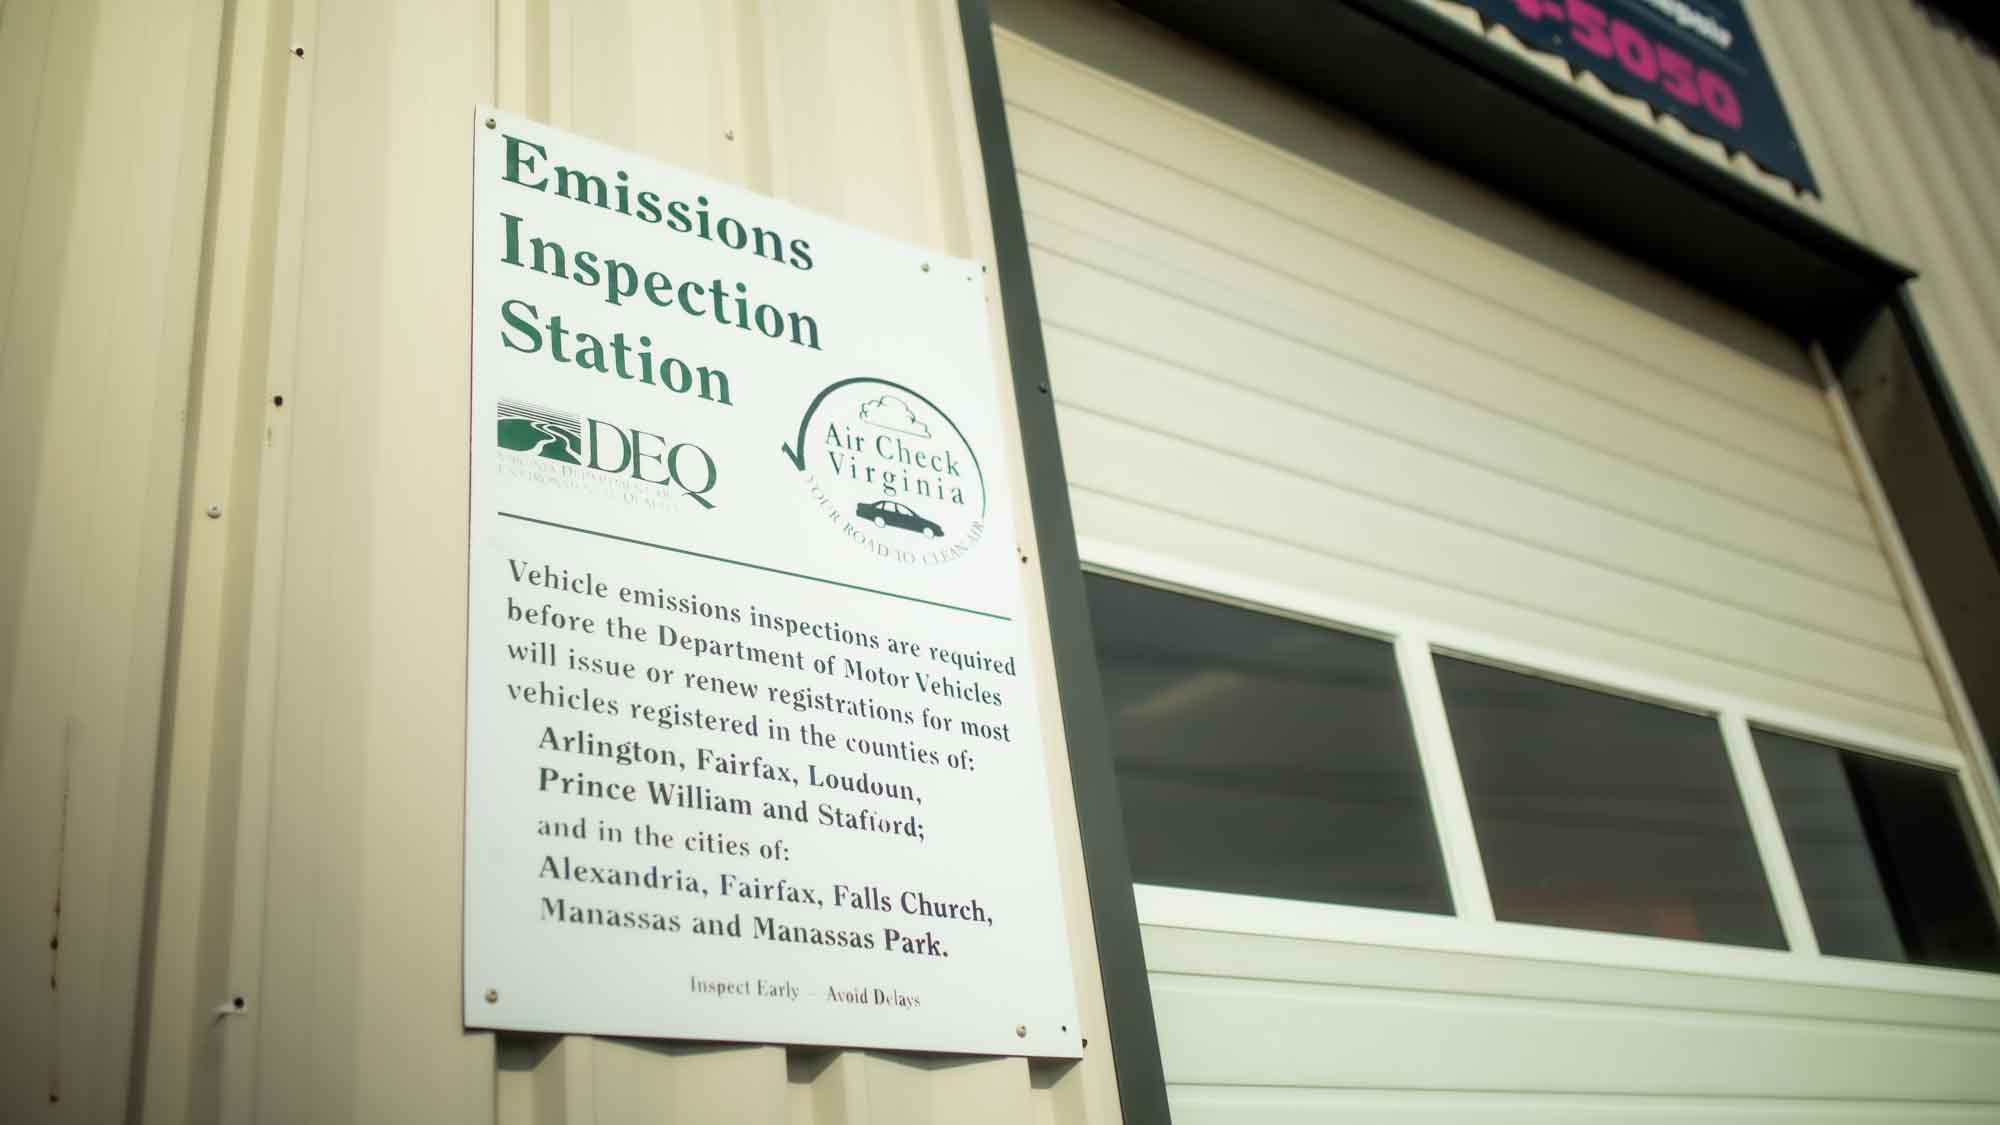 emissions inspections sign on building